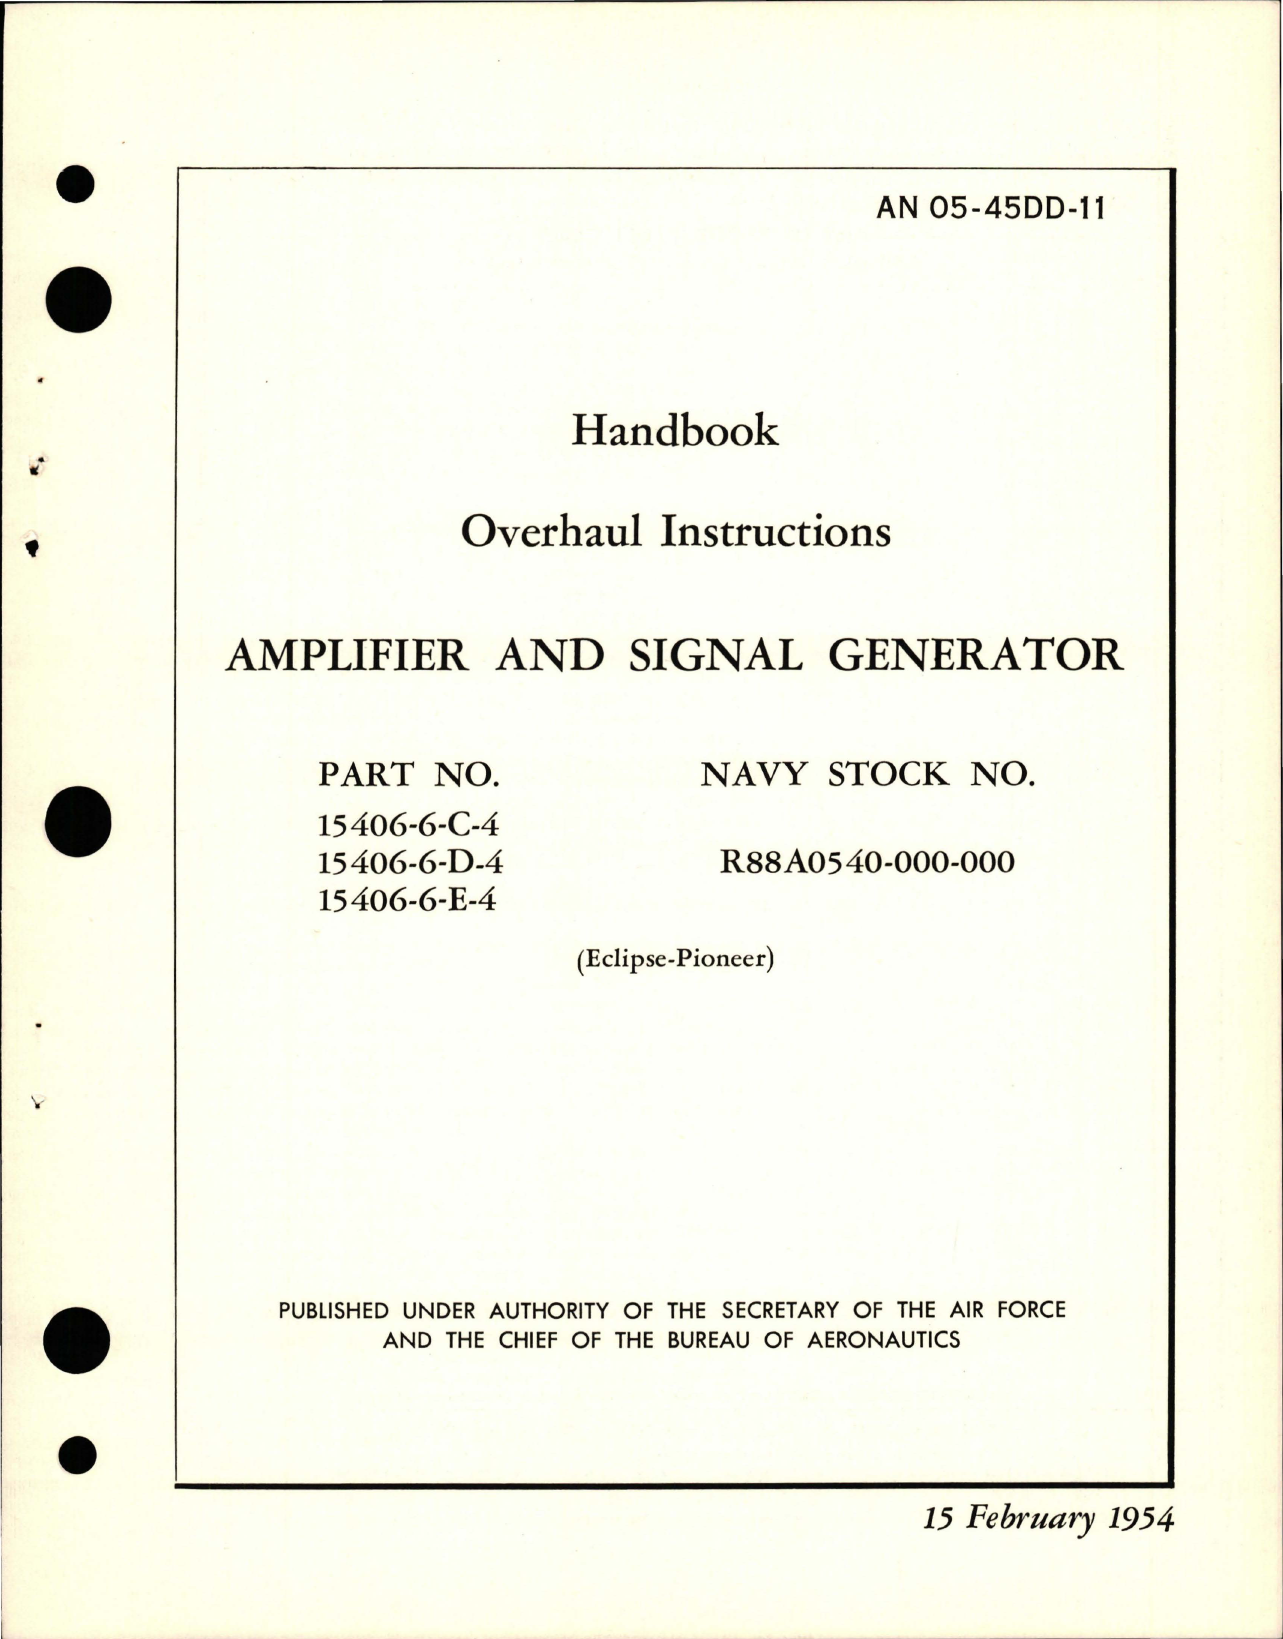 Sample page 1 from AirCorps Library document: Overhaul Instructions for Amplifier and Signal Generator - Parts 15406-6-C-4, 15406-6-D-4, 15406-6-E-4 